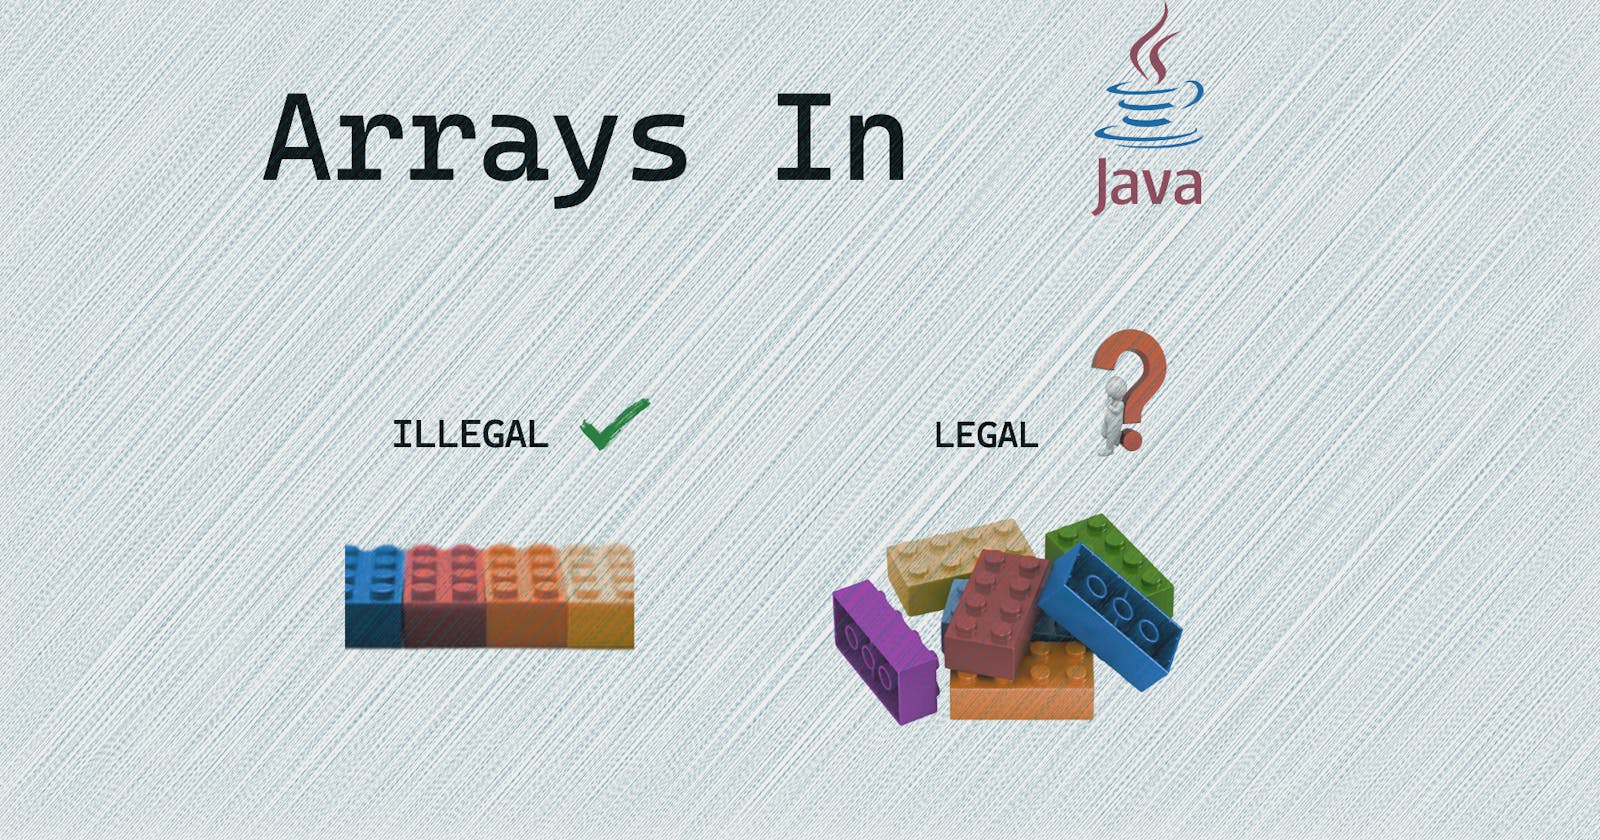 How Arrays work differently in Java?